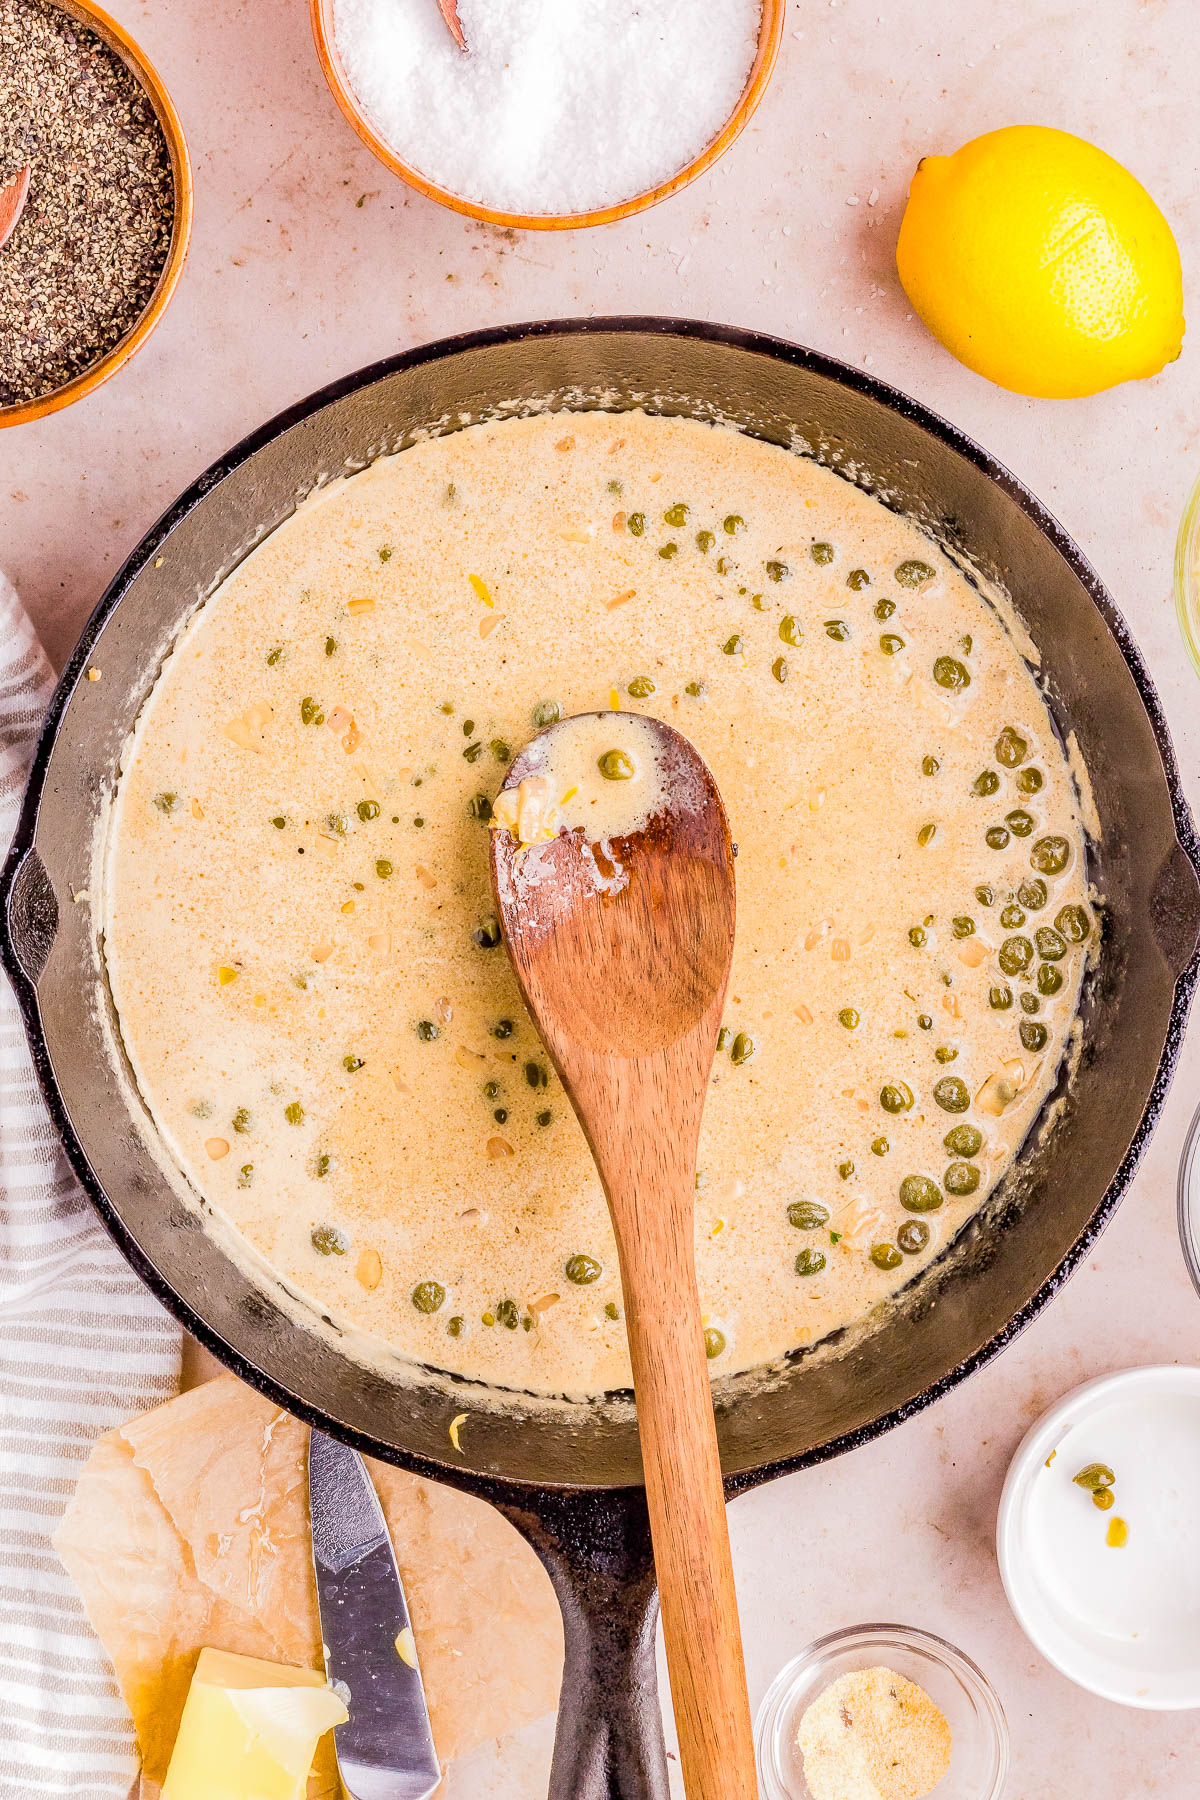 Sauce with capers being stirred in a skillet, surrounded by ingredients like lemon and spices.